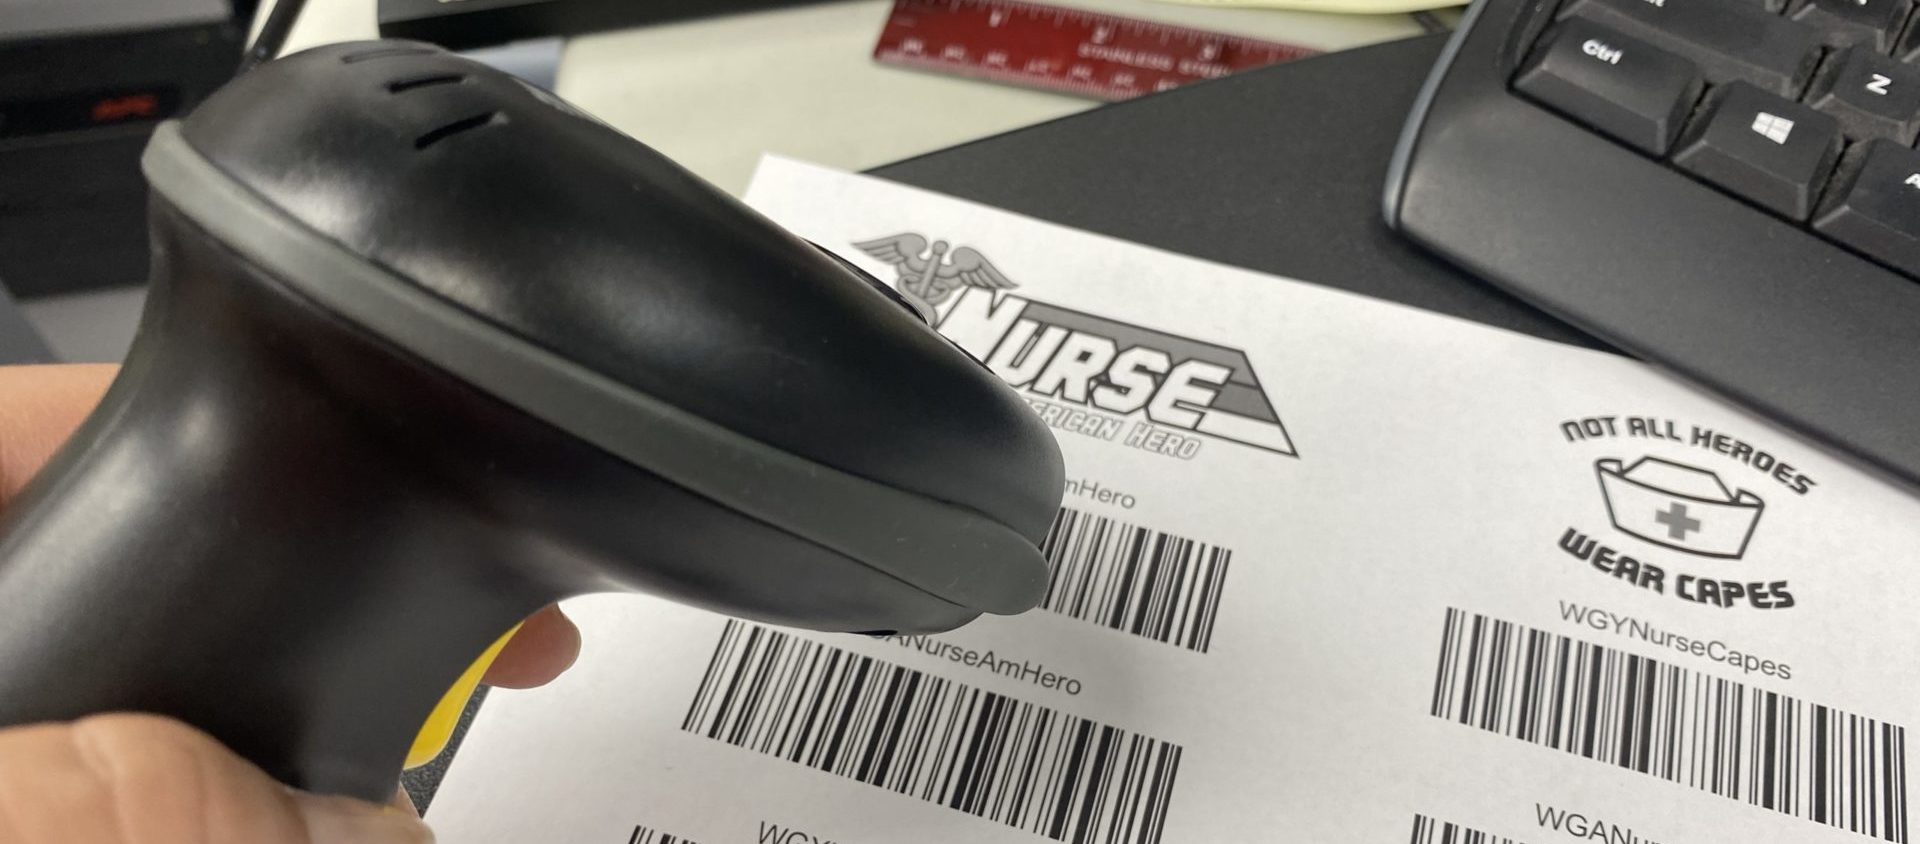 Workflow Improvements using a Barcode Reader